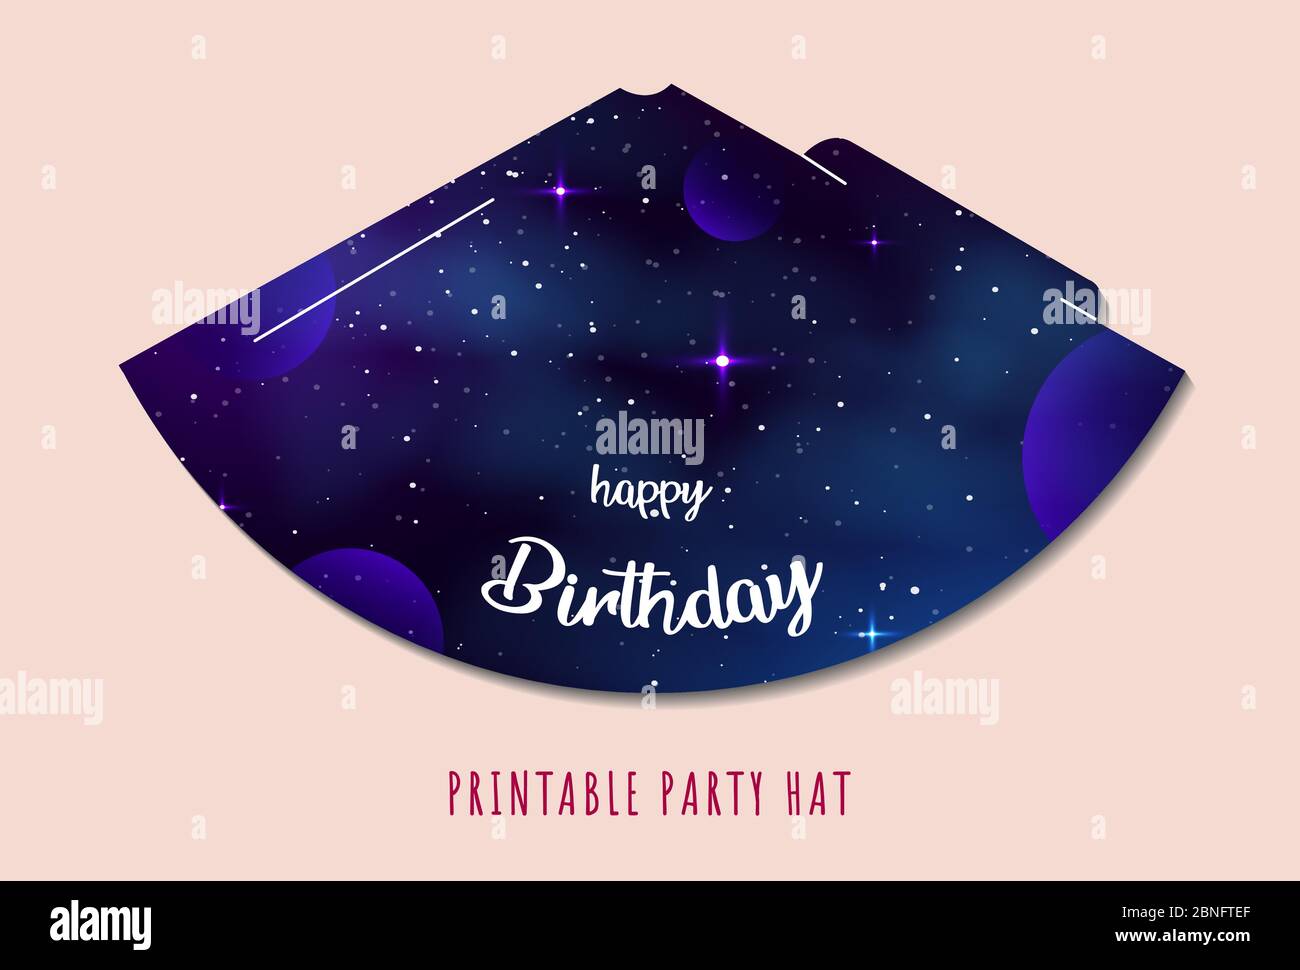 Party hats printable. Space explorer. Print and cut. Happy birthday elements. Vector set of cones template to head for holiday. Stock Vector